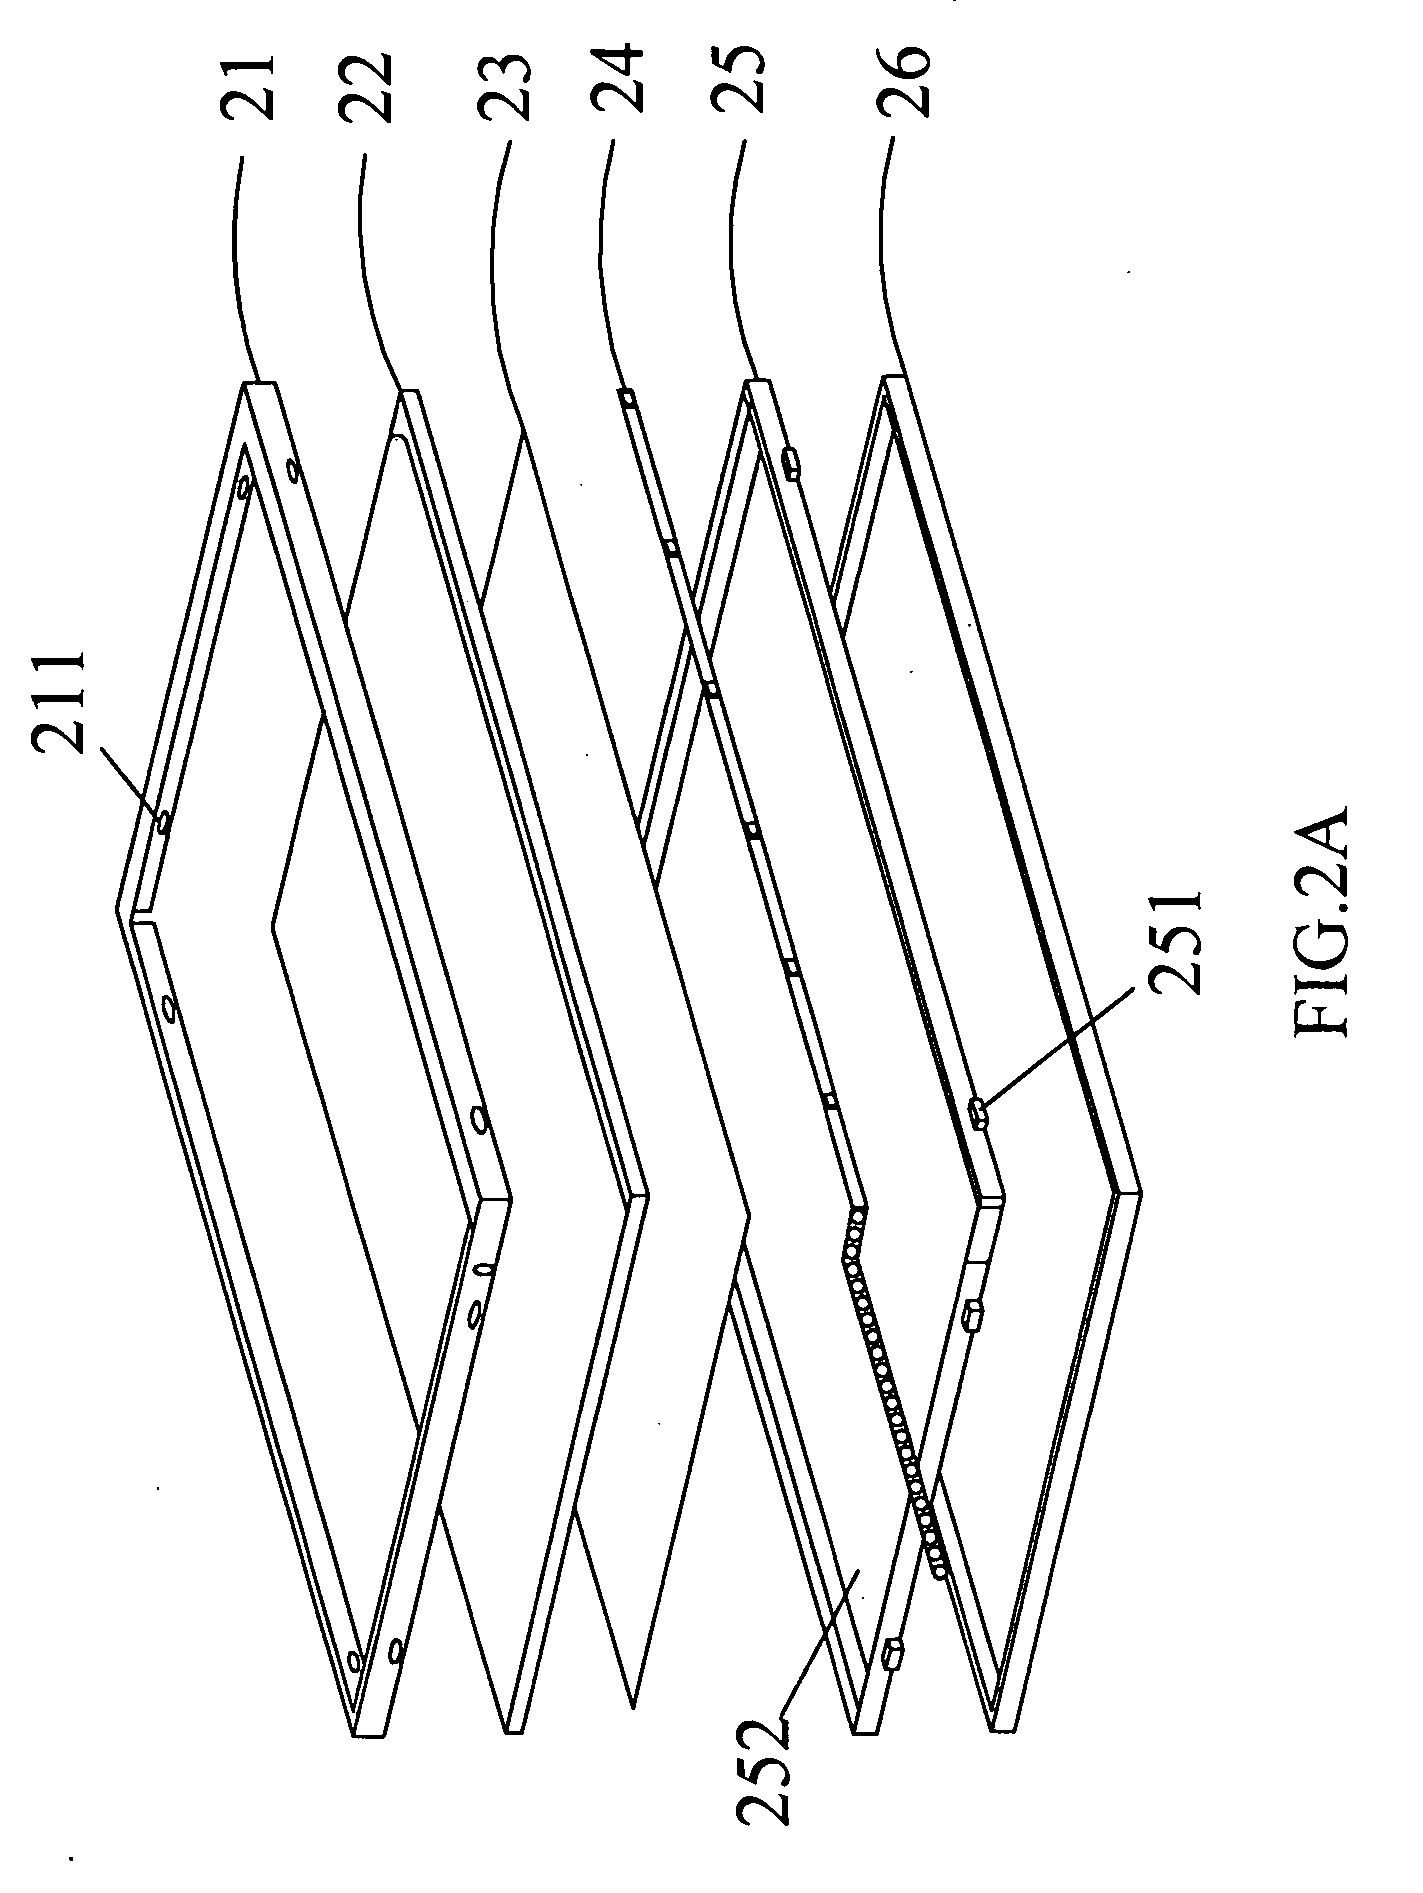 Display device with composite backlight module